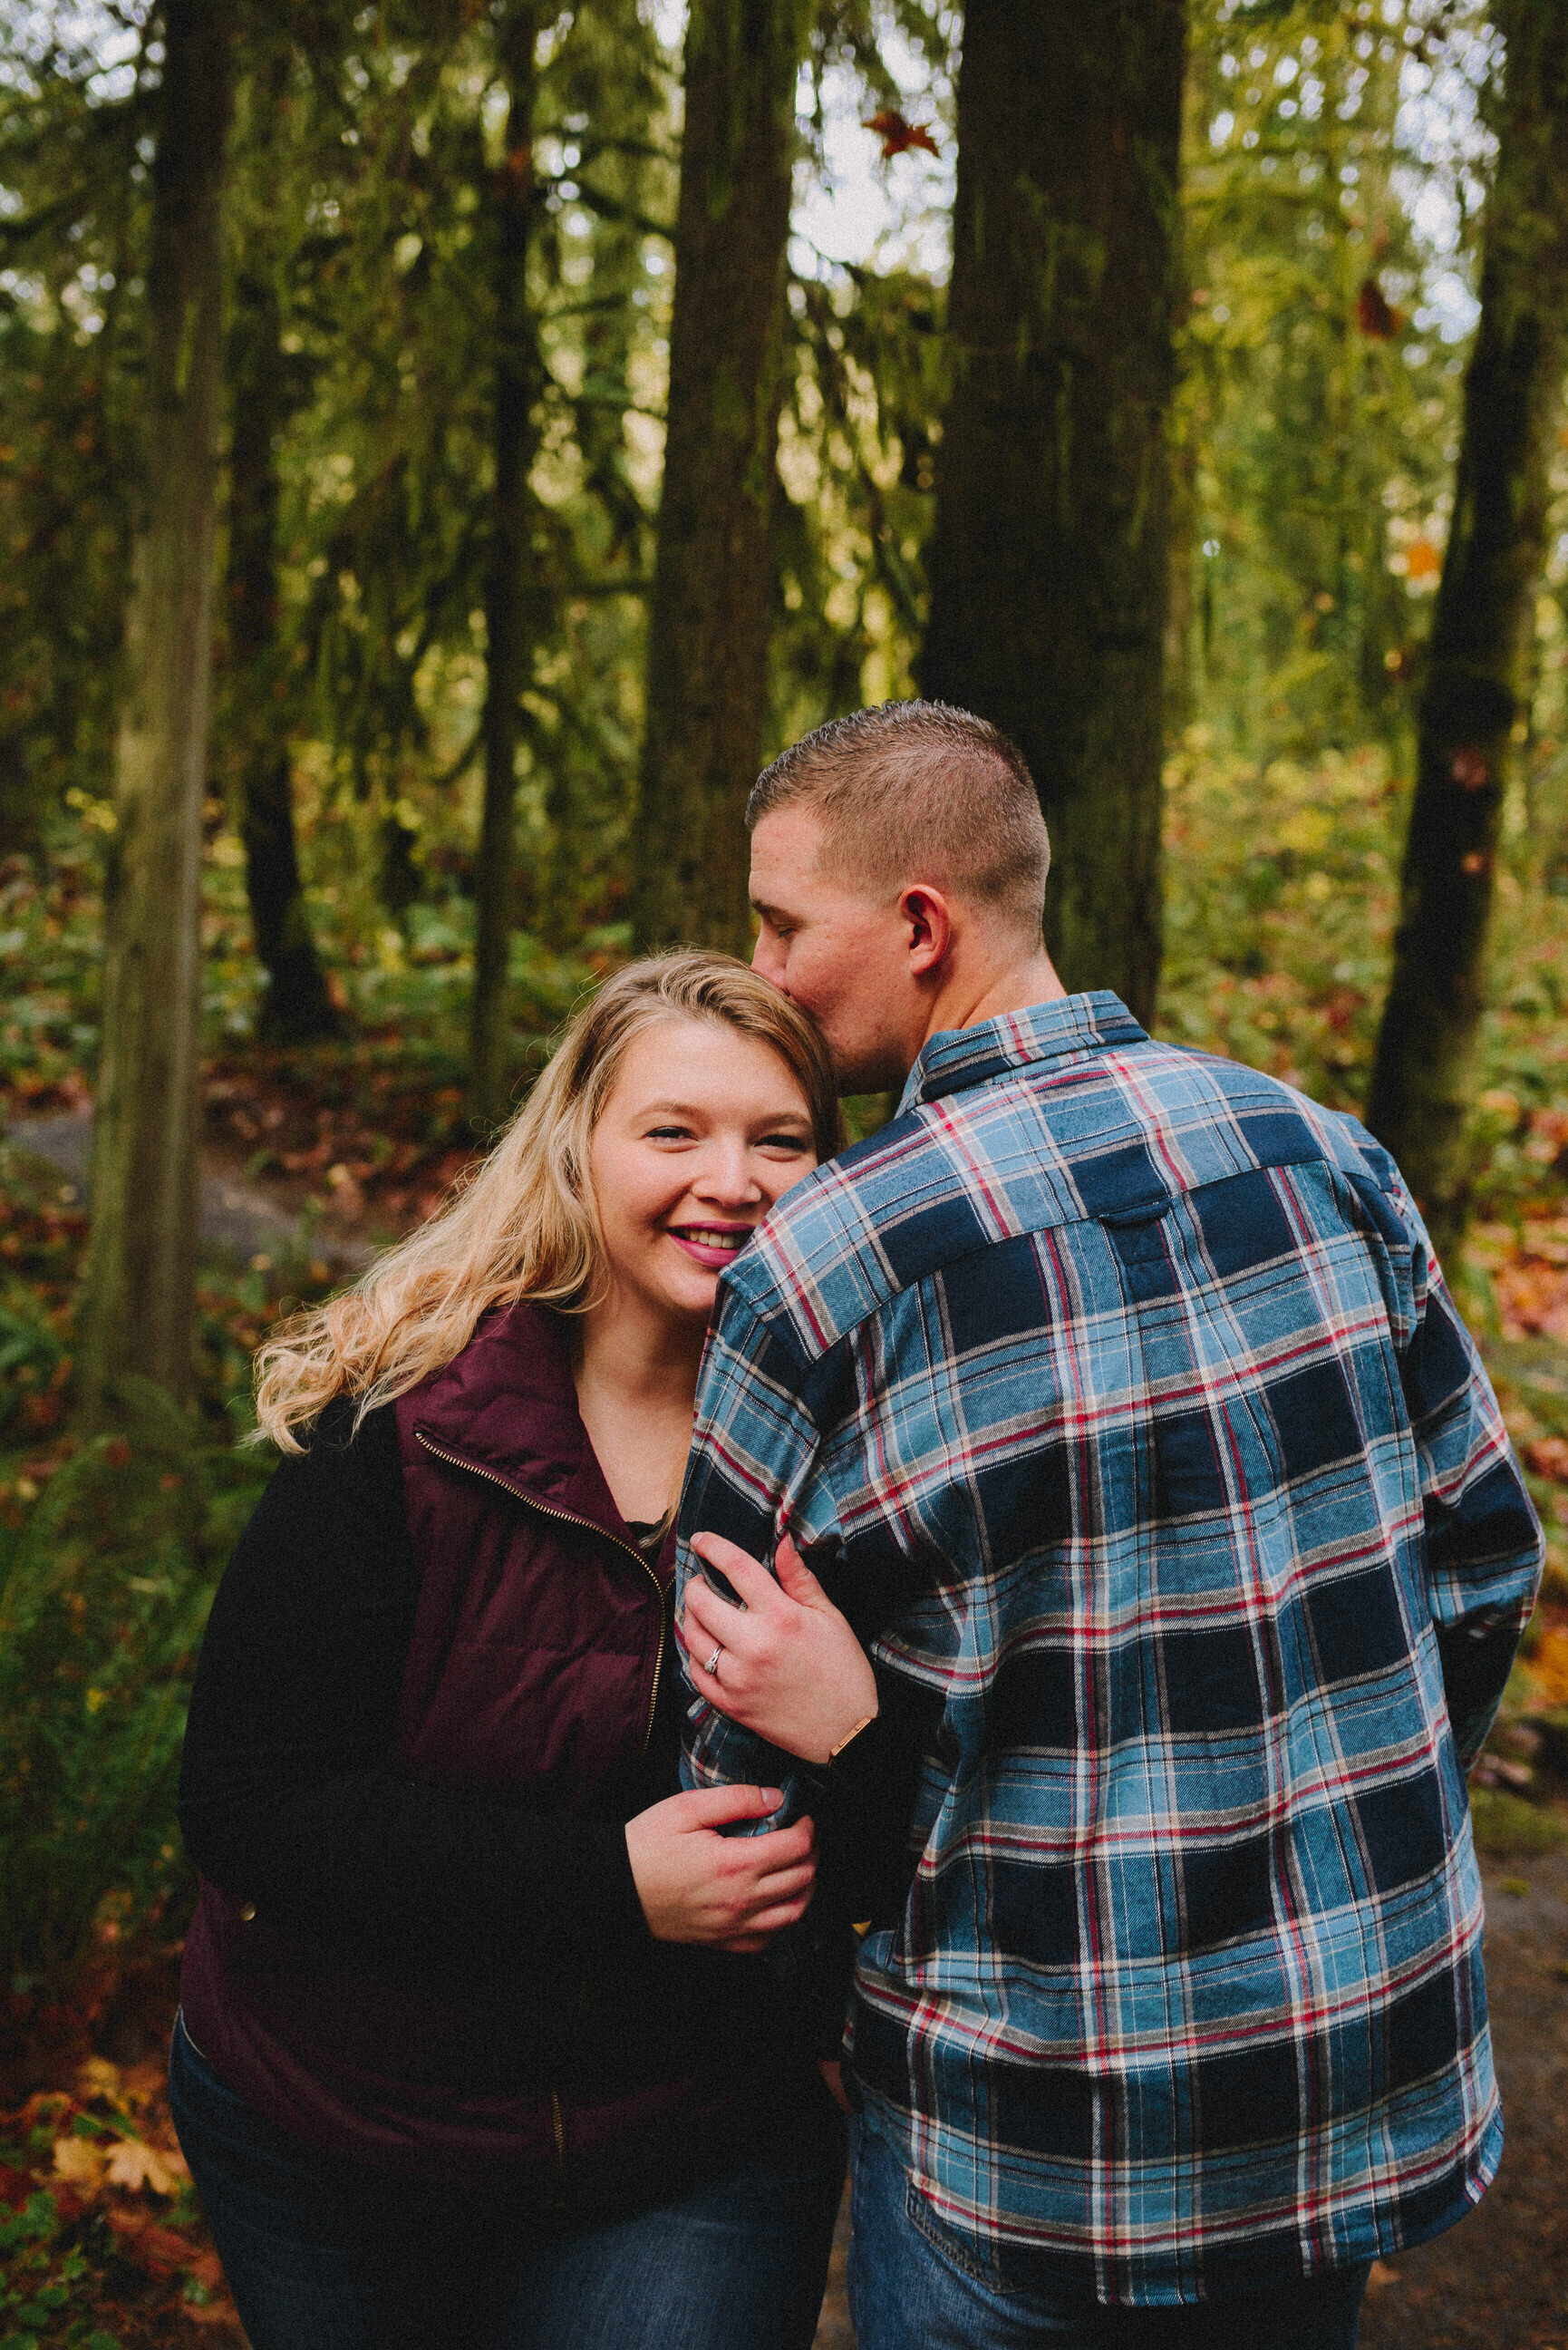 priest-point-park-couples-session-olympia-washington-way-up-north-photography (106).jpg